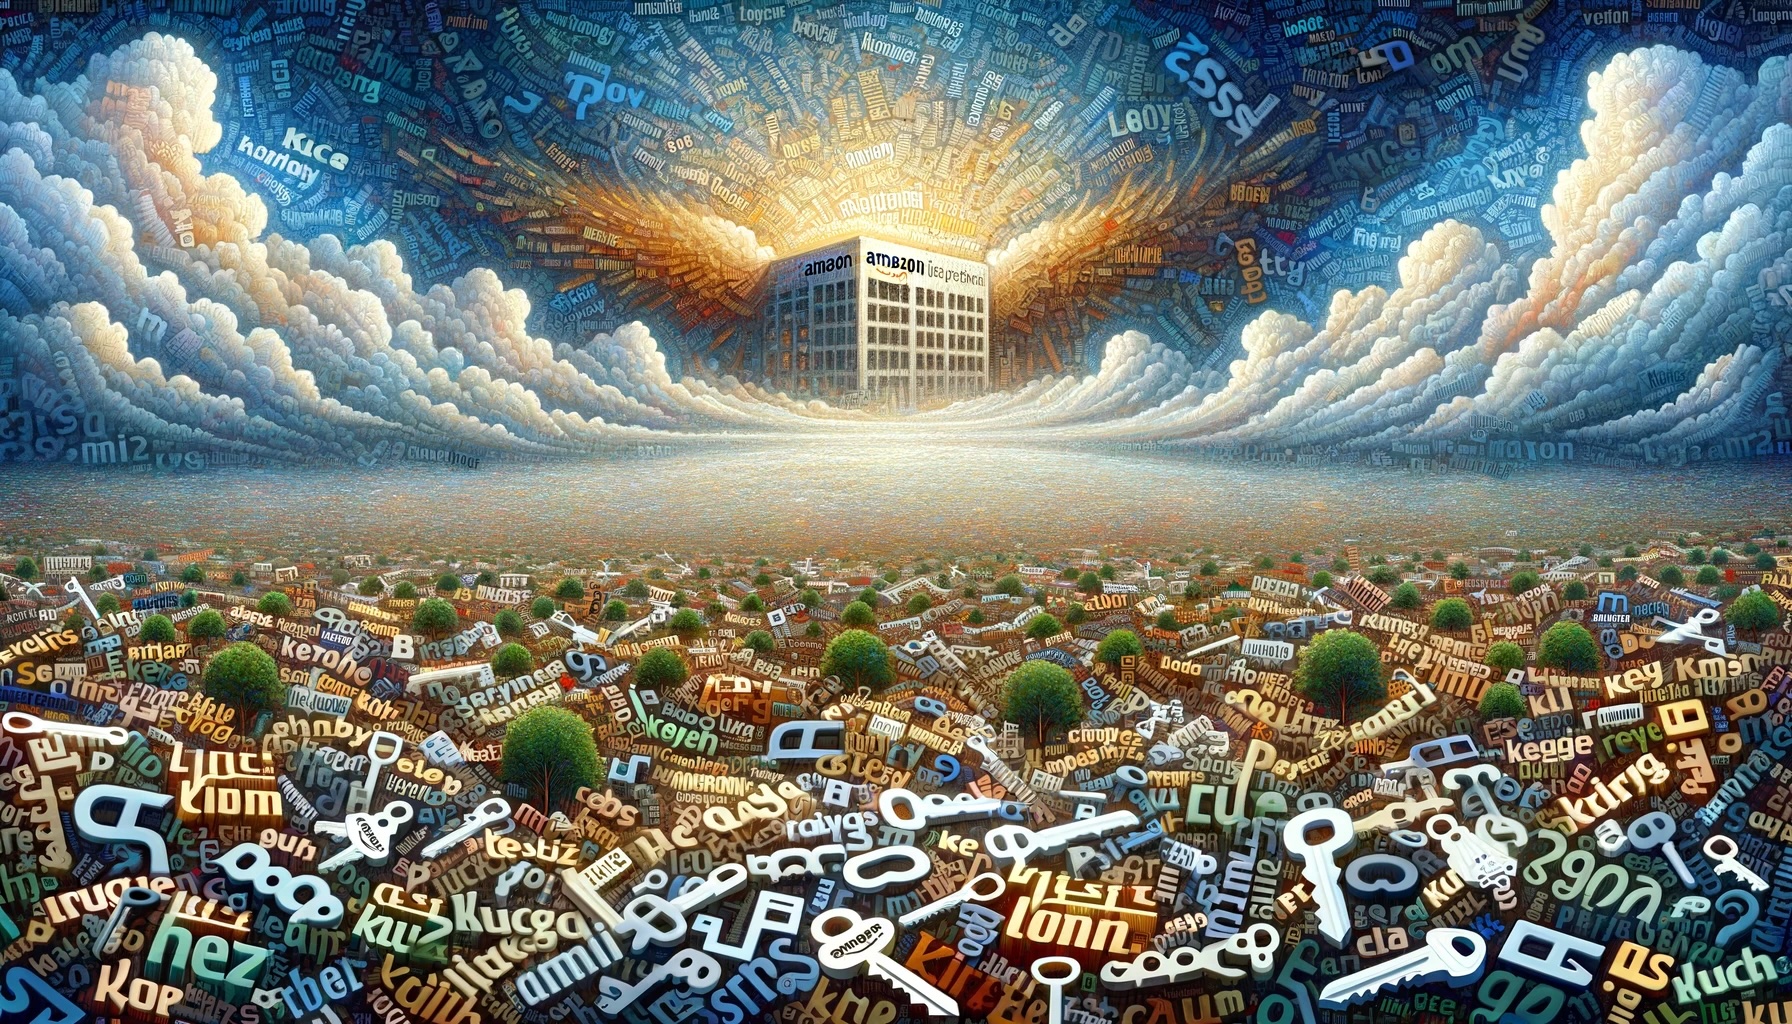 A dramatic imagined view of heaven with an Amazon building at the center and fields of words in the foreground